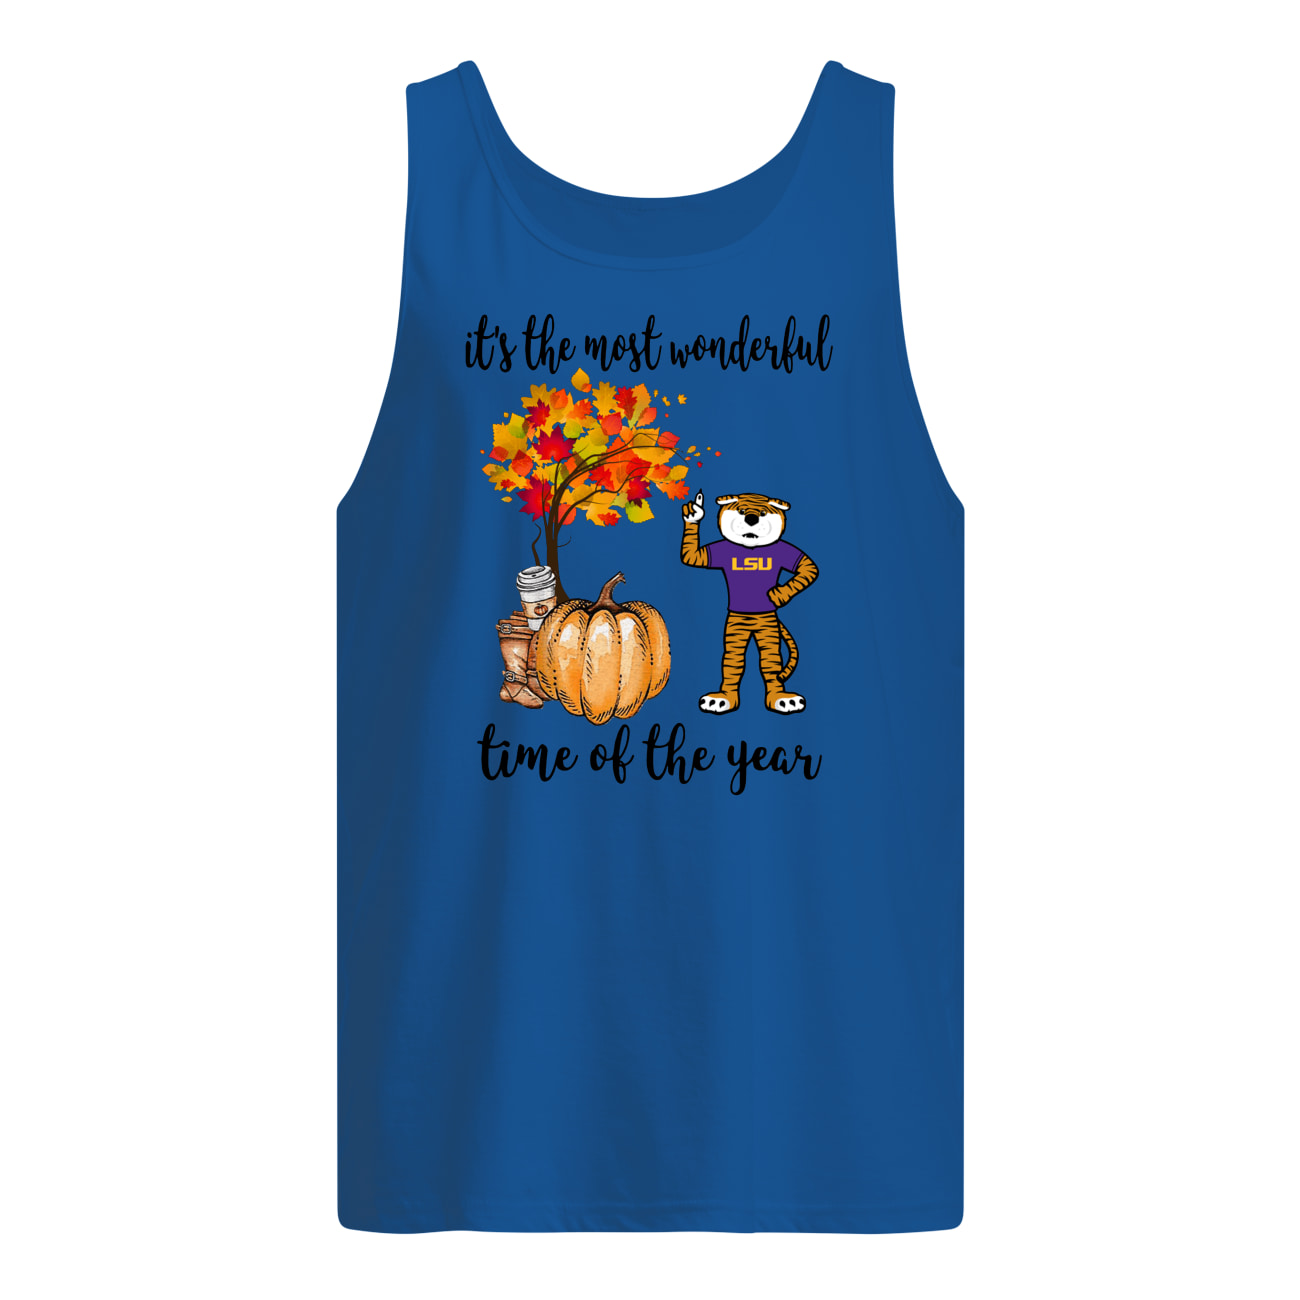 LSU tigers it's the most wonderful time of the year tank top